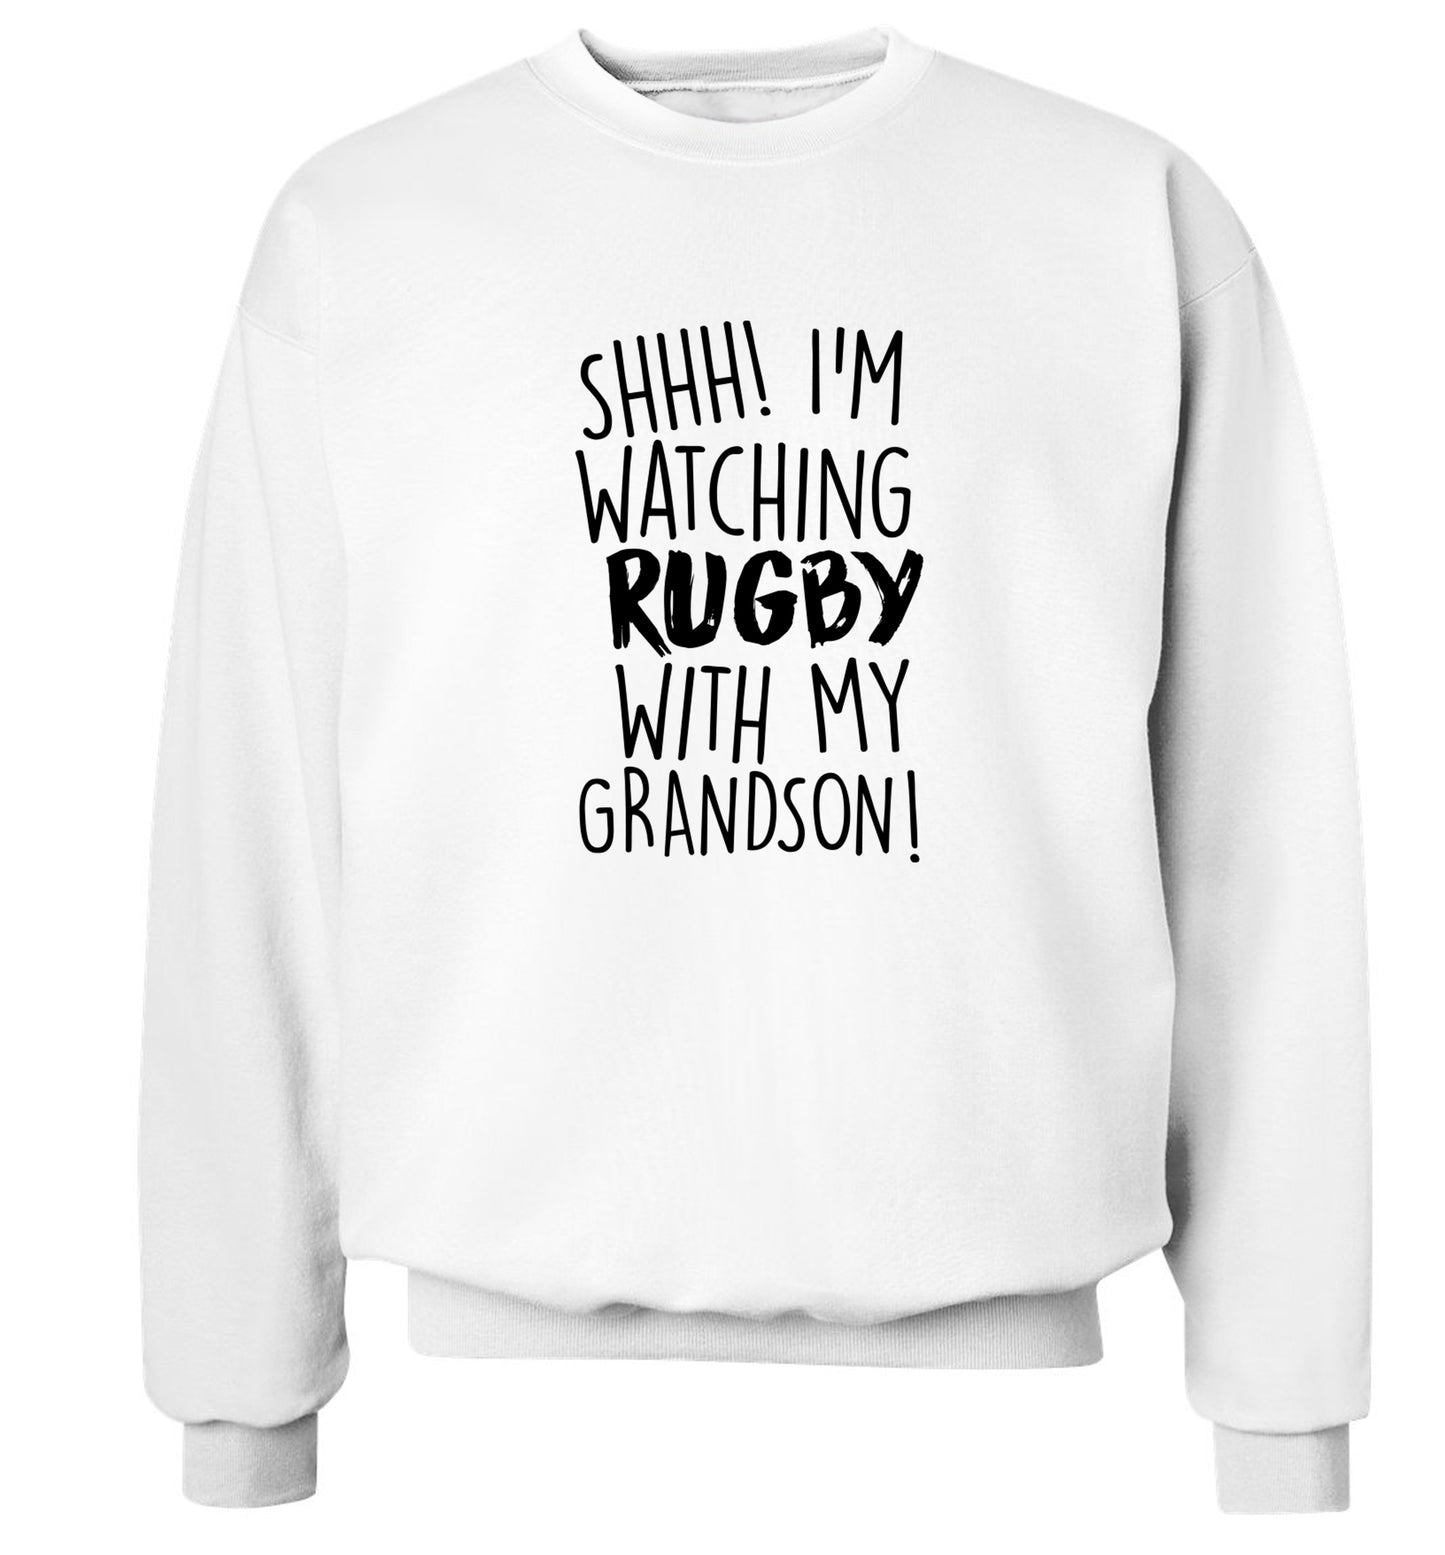 Shh I'm watching rugby with my grandson Adult's unisex white Sweater 2XL